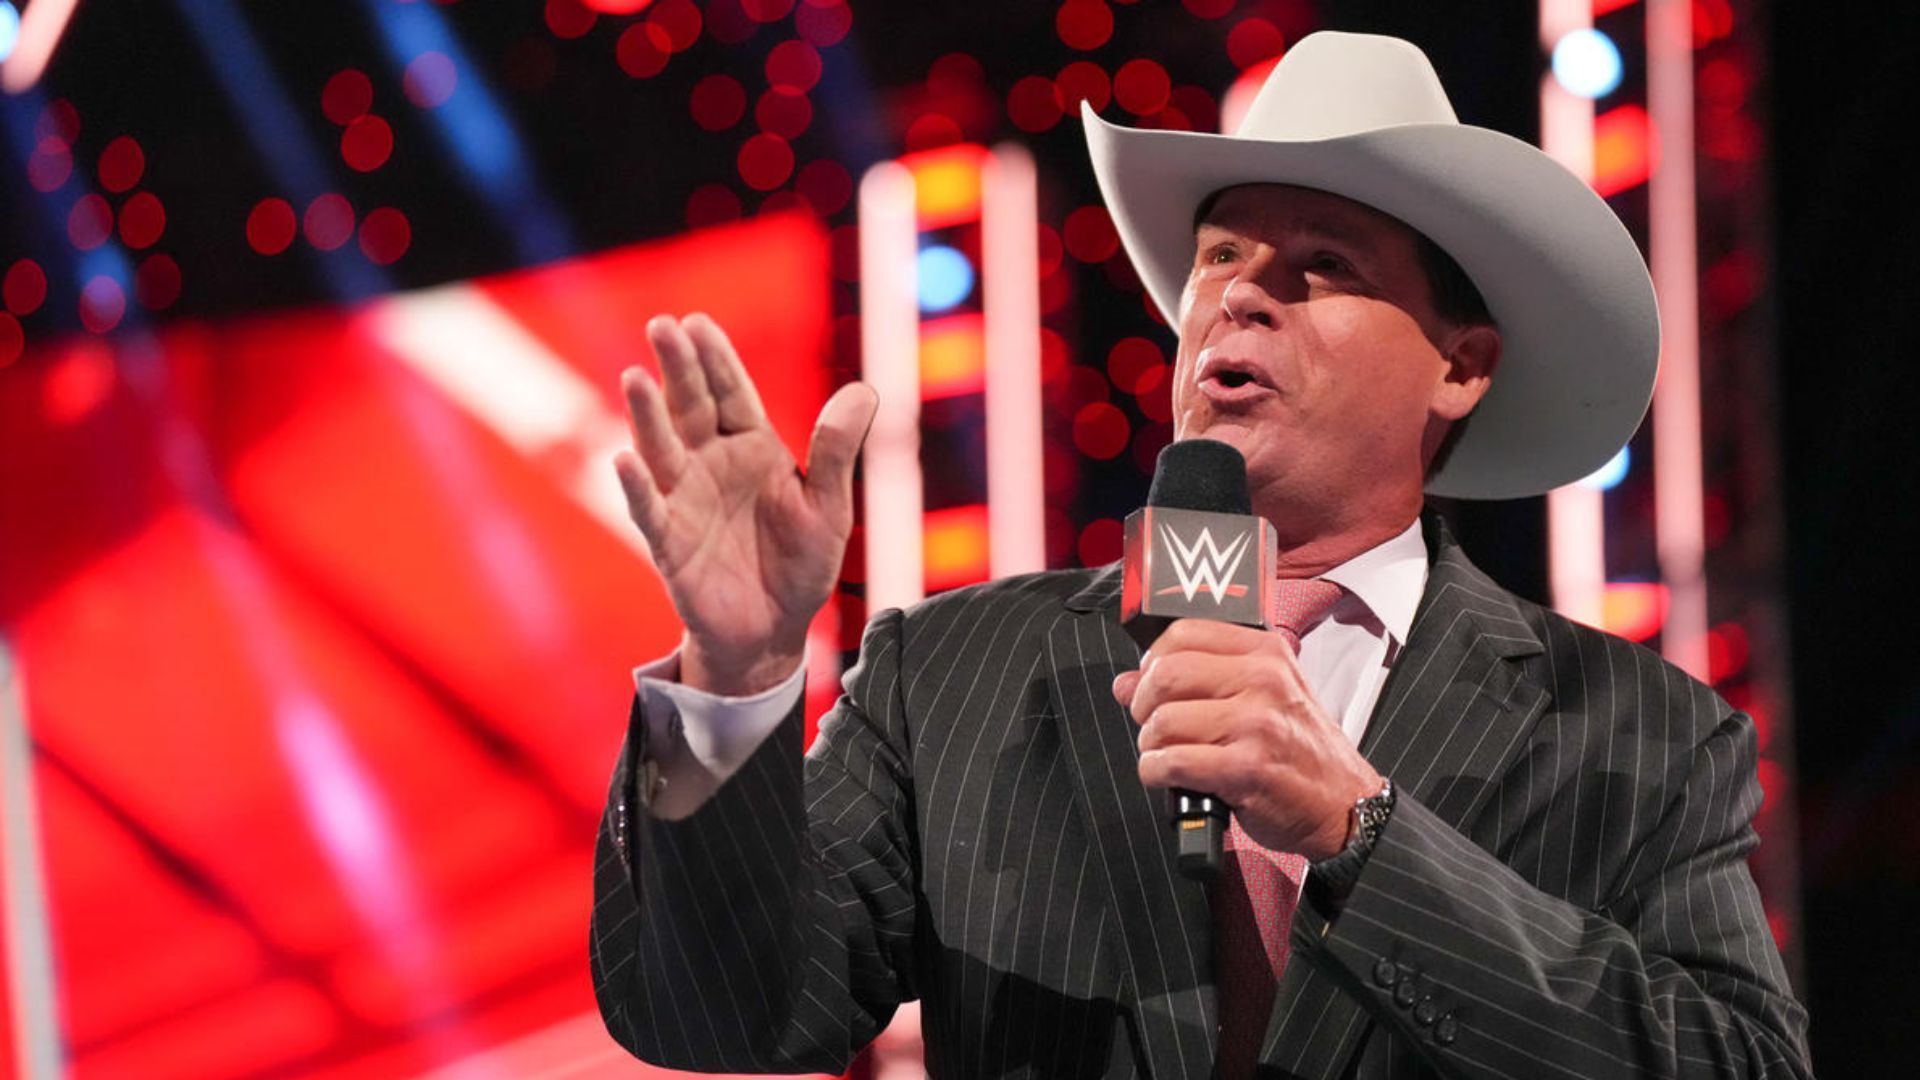 Wrestling legend JBL recently returned to WWE to manage Baron Corbin on RAW